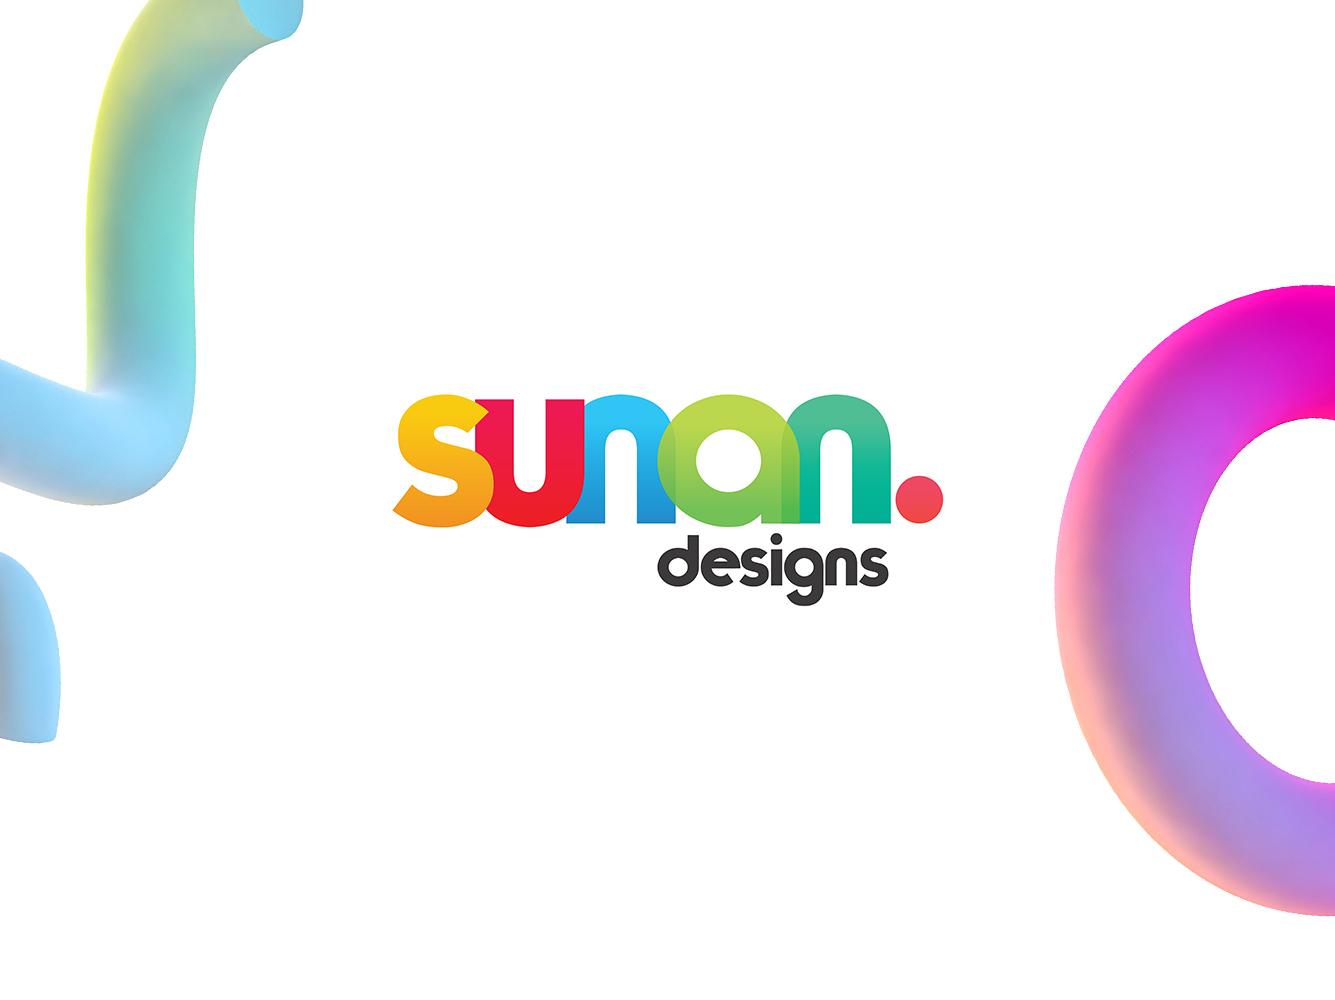 Header image for Why Sunan Designs?